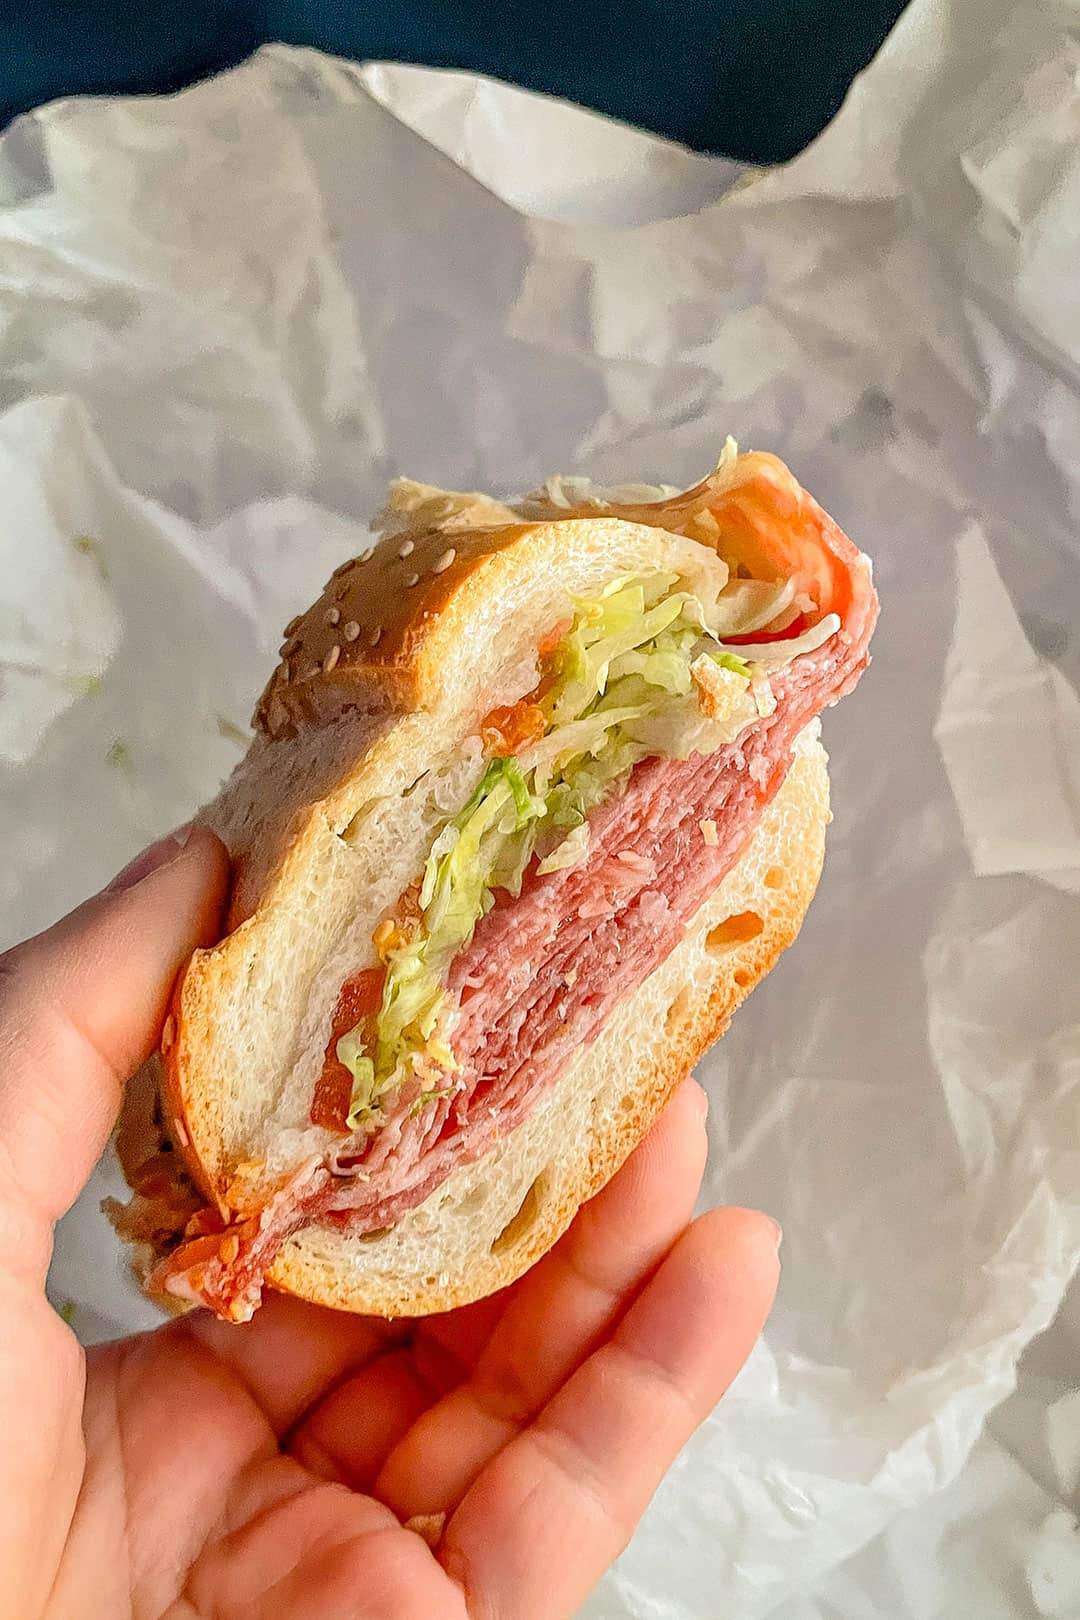 sals deli astoria + 99 best places to eat in nyc